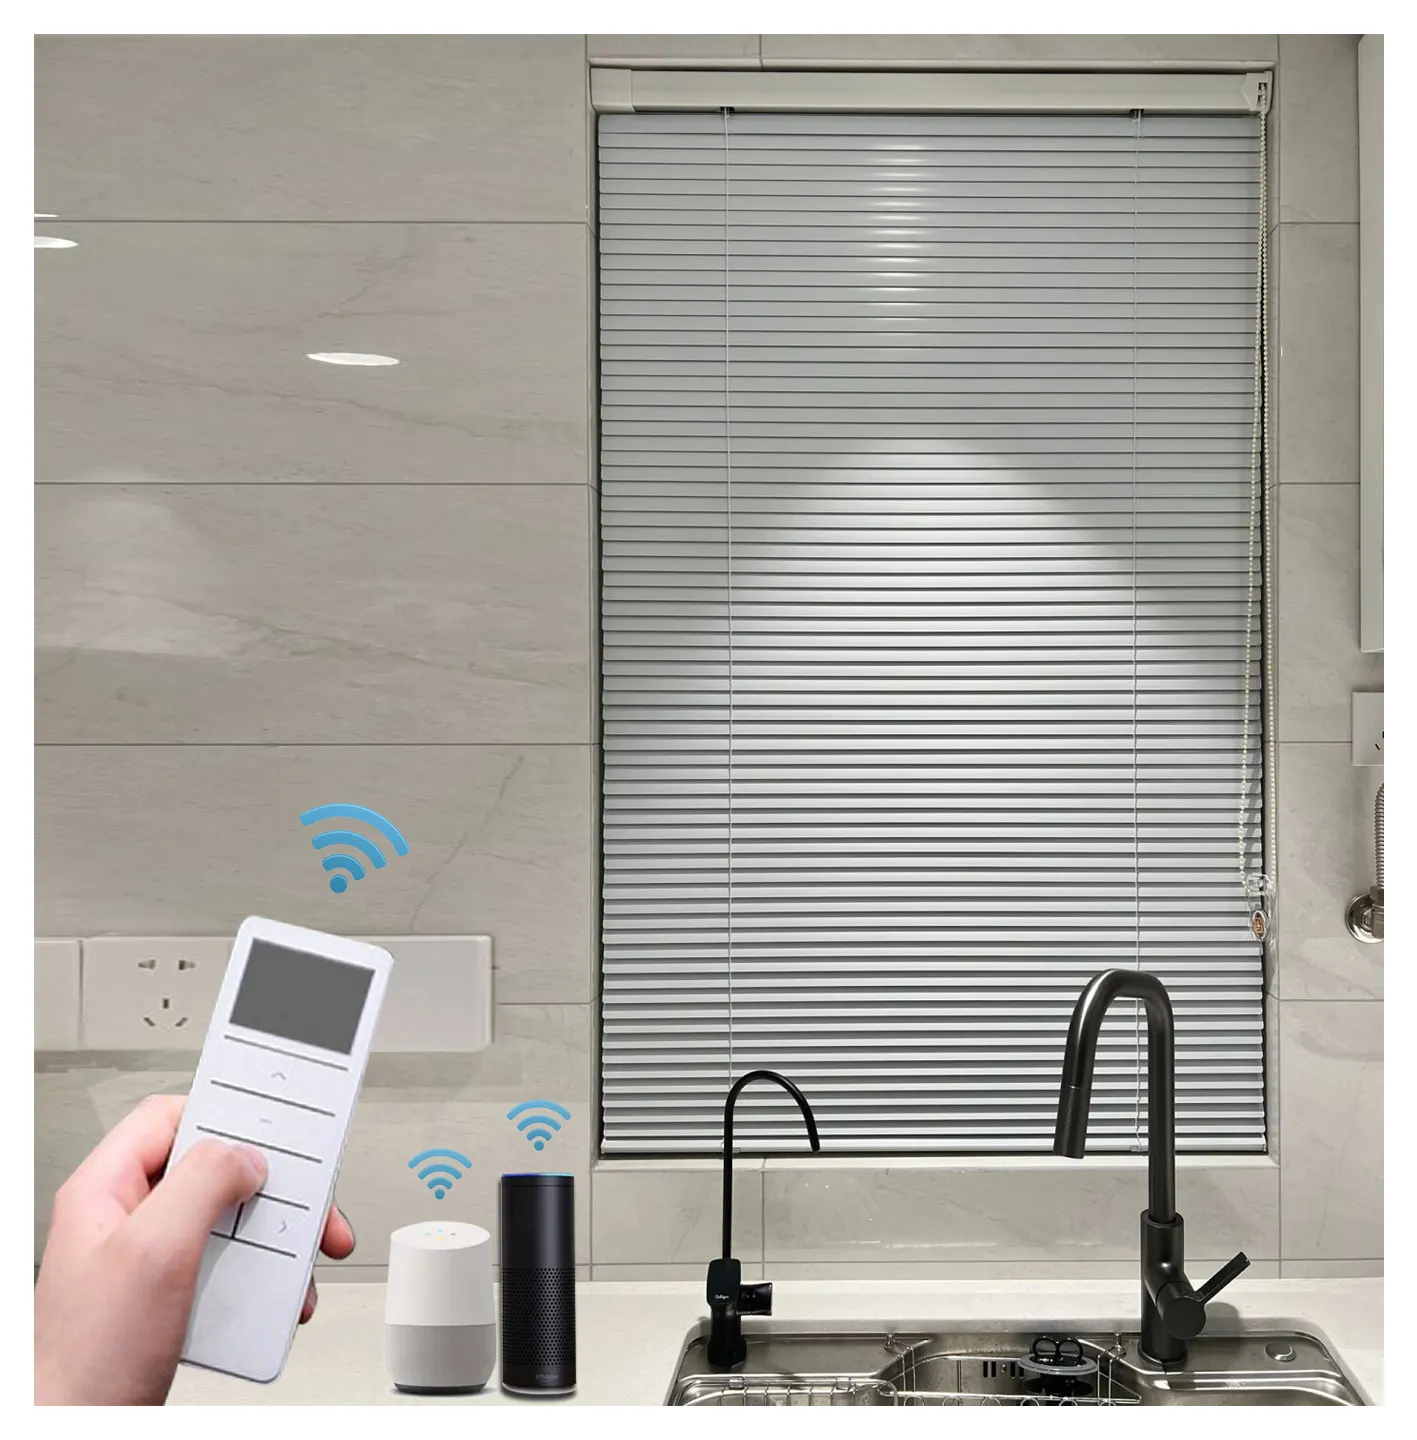 Automatic Perforation-free Shutter Blinds Bathroom Office Kitchen Hand Supported Venetian Blinds Roller Blinds